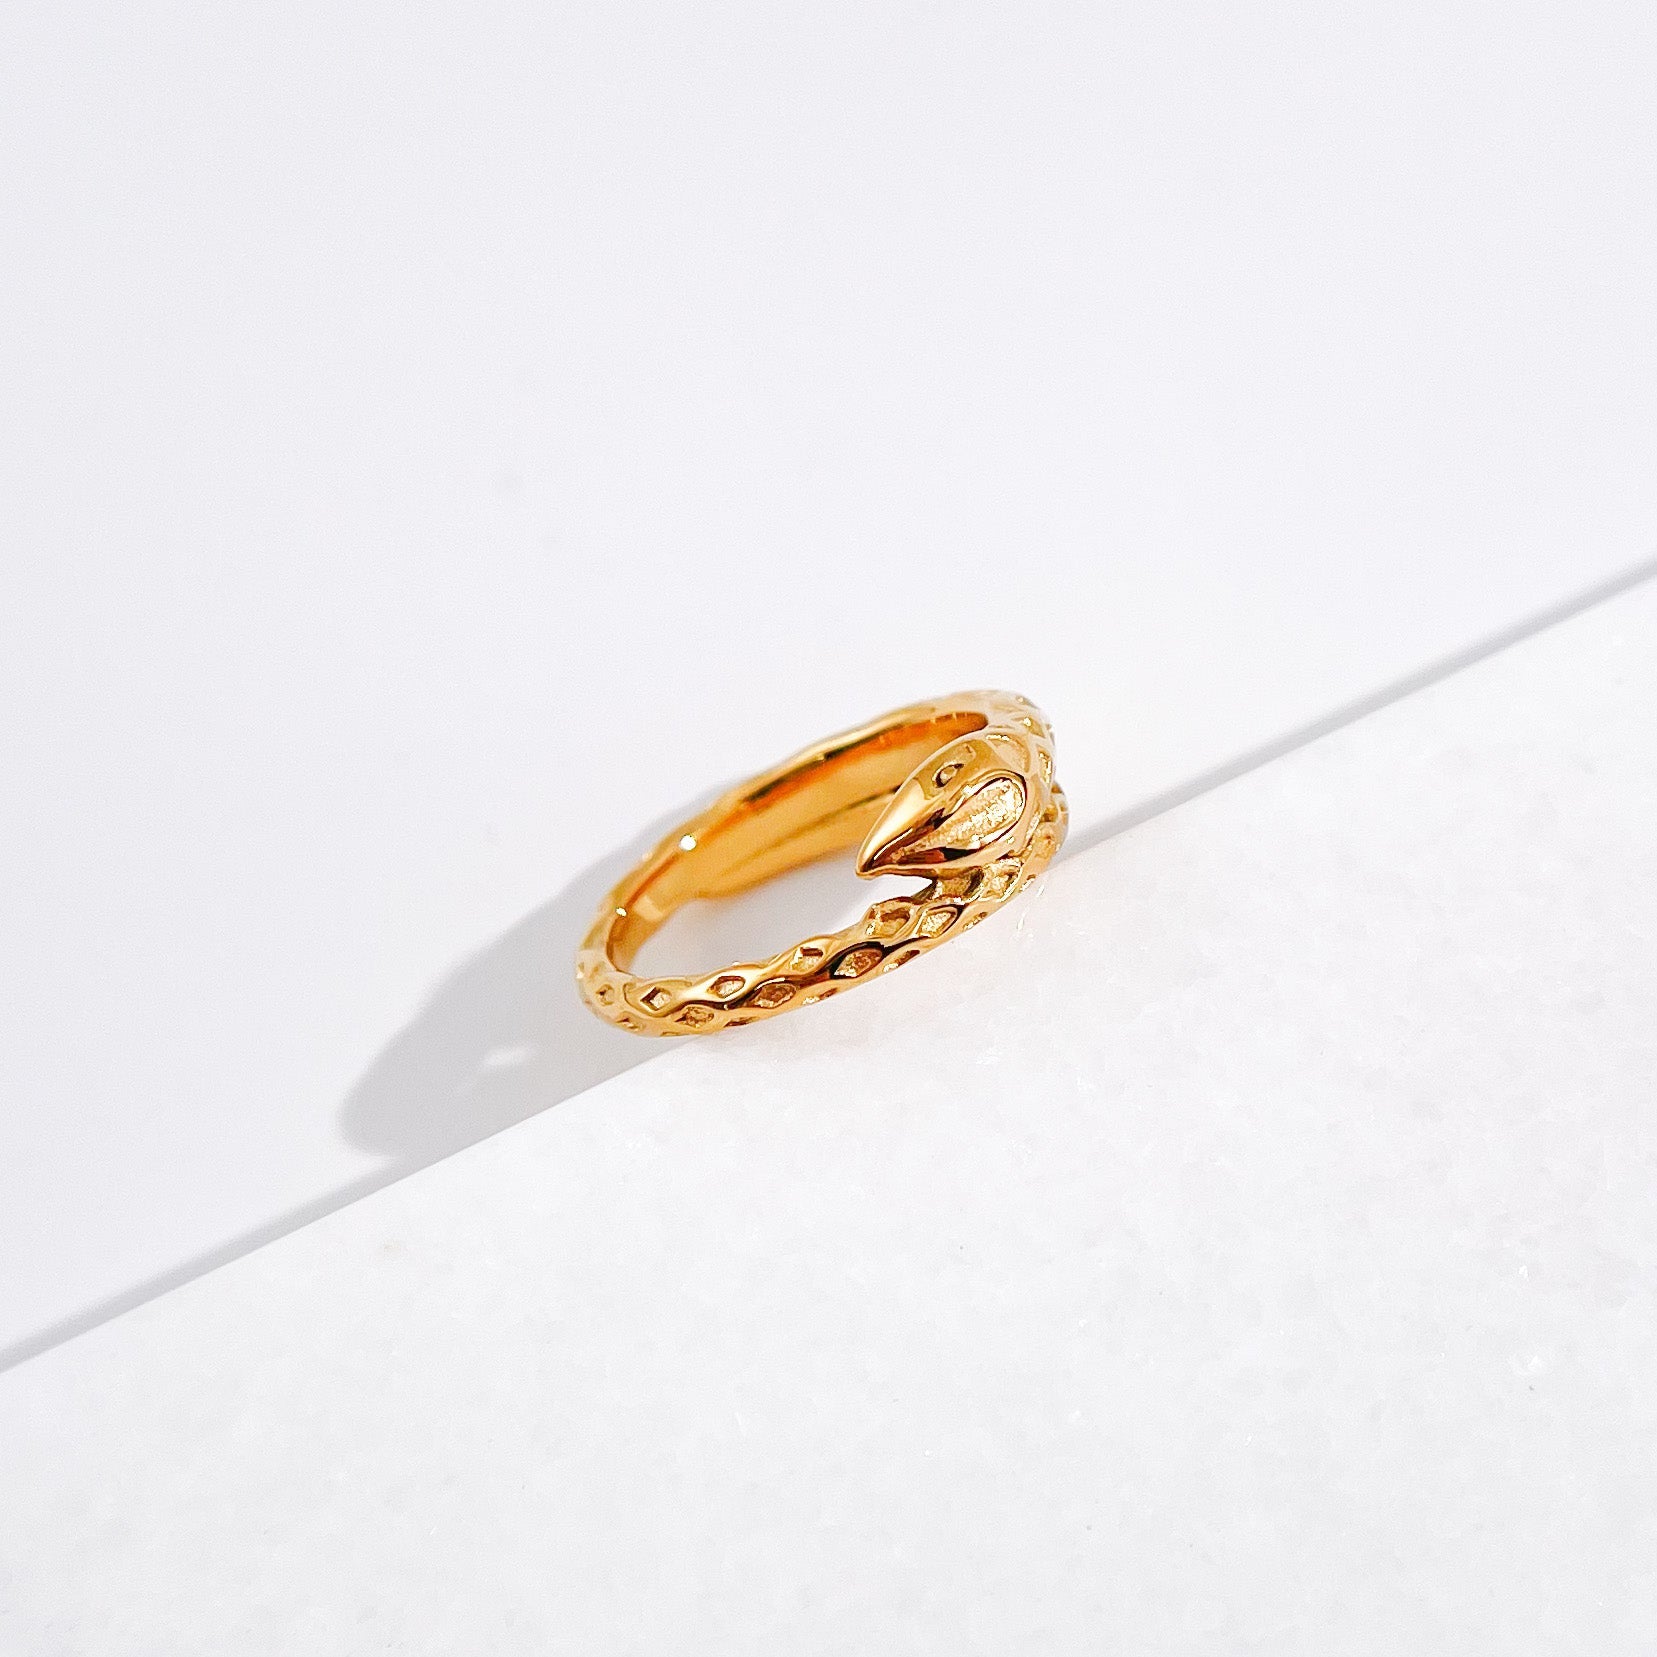 Serpent Ring in Gold - Flaire & Co.